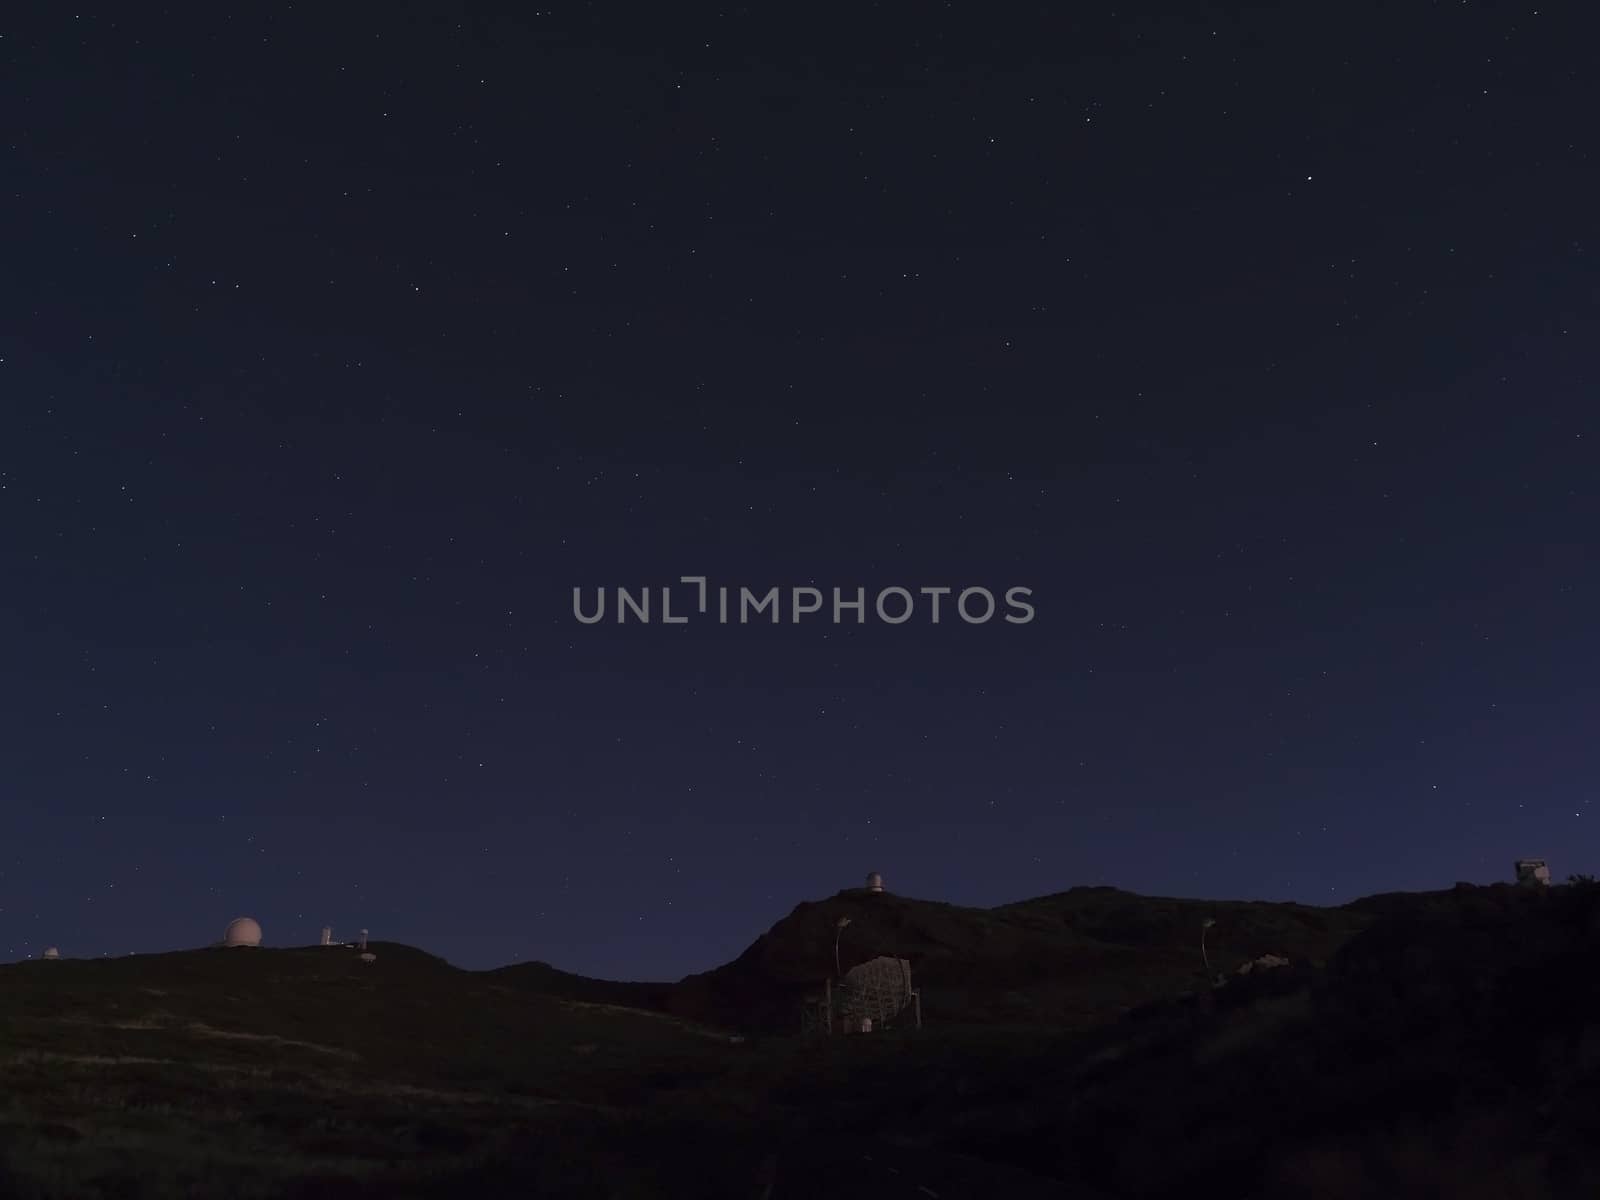 Night astrophotography, sky with stars at Roque de los Muchachos with telescopes of astronomical observatory, la Palma, Canary islands, Spain.